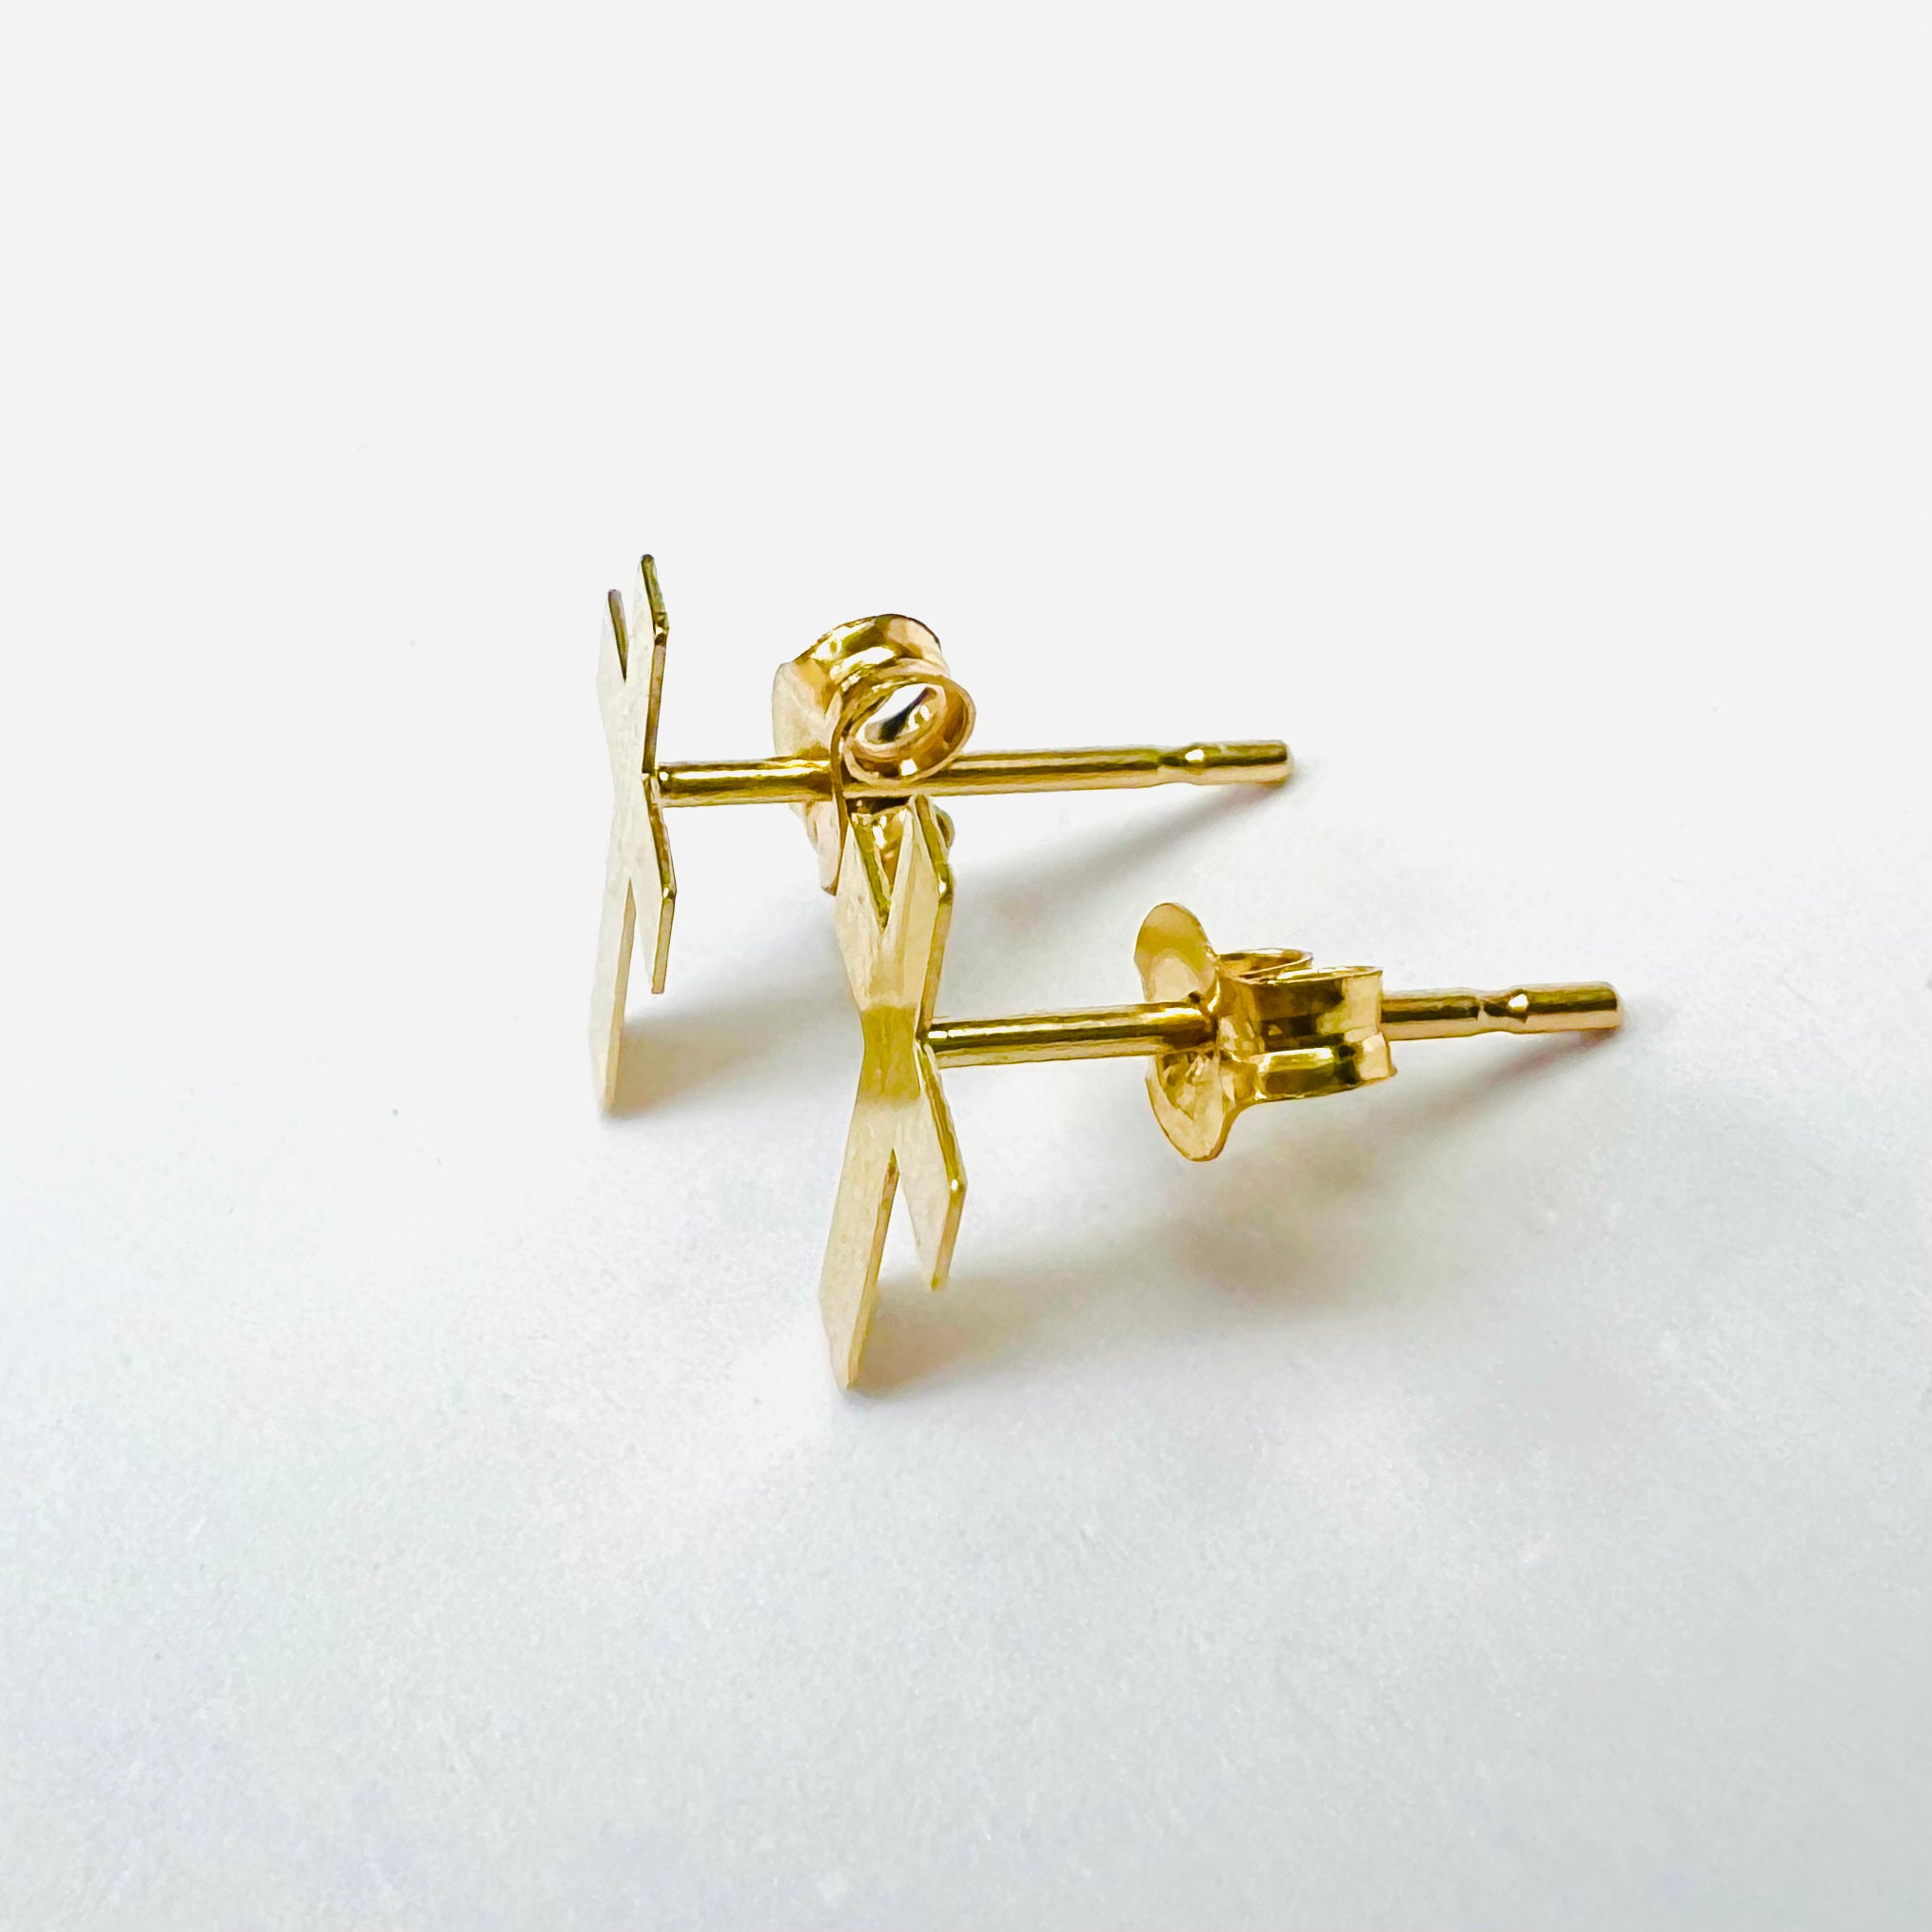 Solid 14k Yellow Gold Simple Flat Cross Push Back Earring Studs 9X6mm